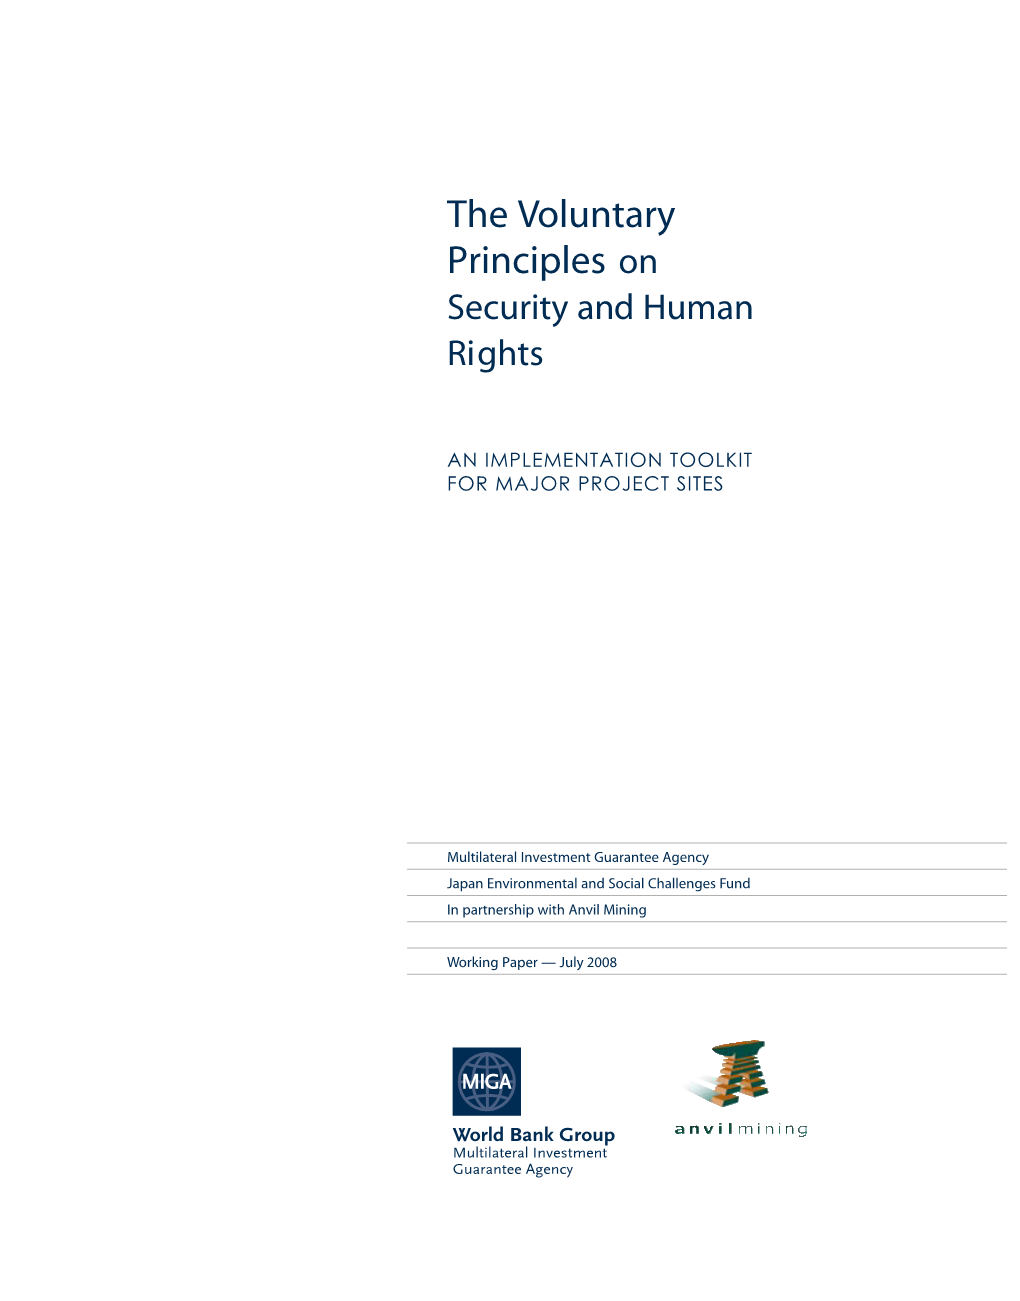 Voluntary Principles on Security and Human Rights